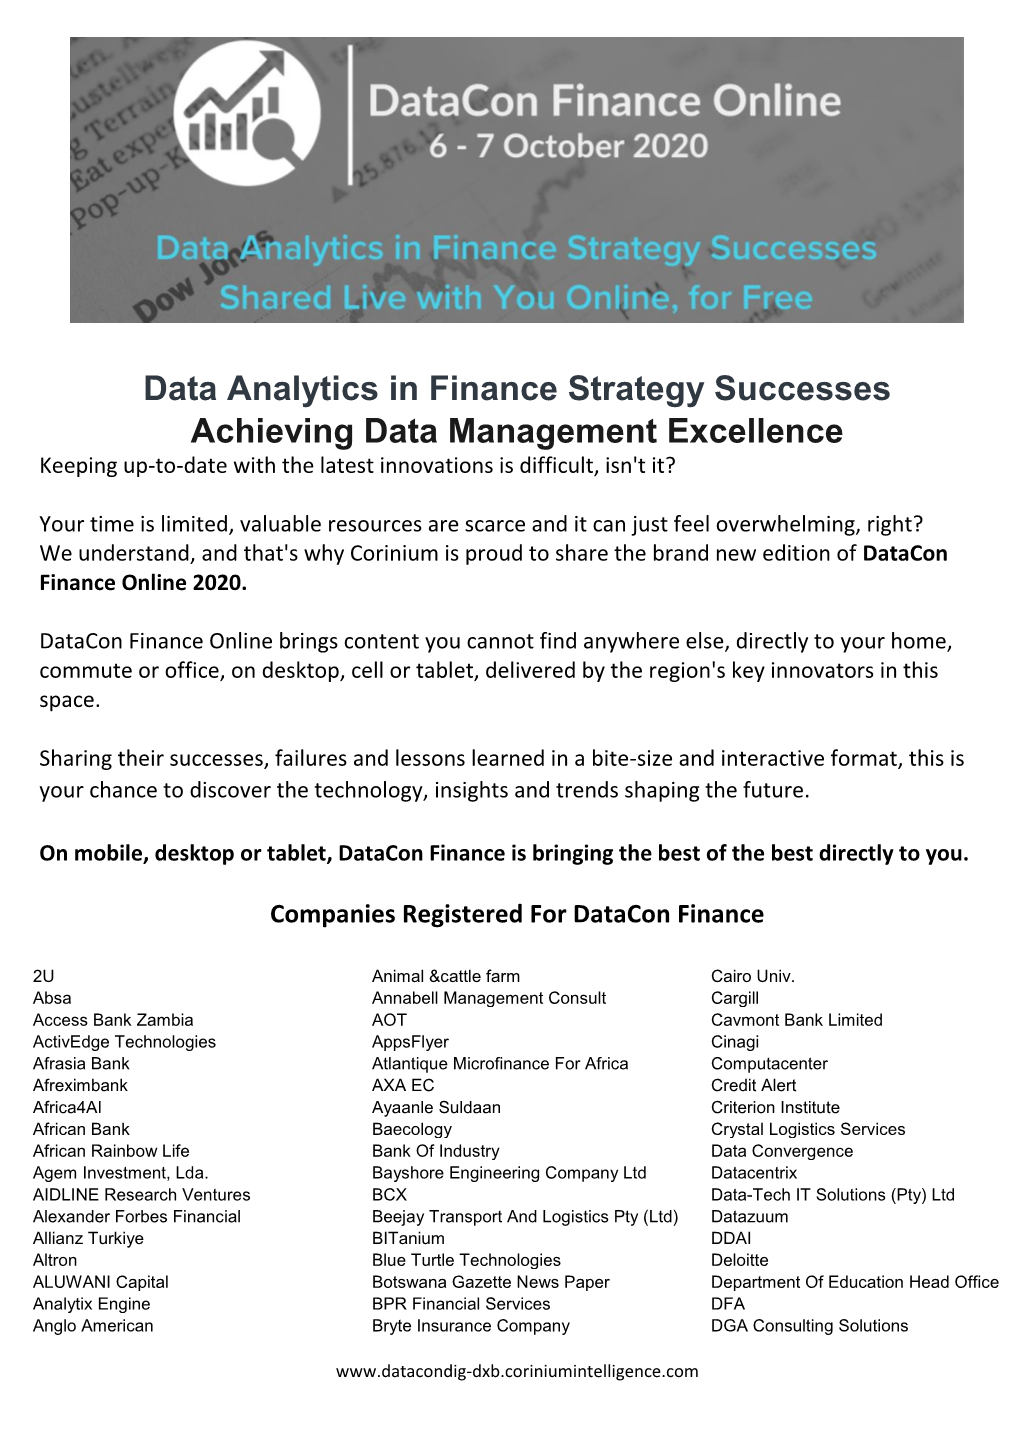 Data Analytics in Finance Strategy Successes Achieving Data Management Excellence Keeping Up-To-Date with the Latest Innovations Is Difficult, Isn't It?